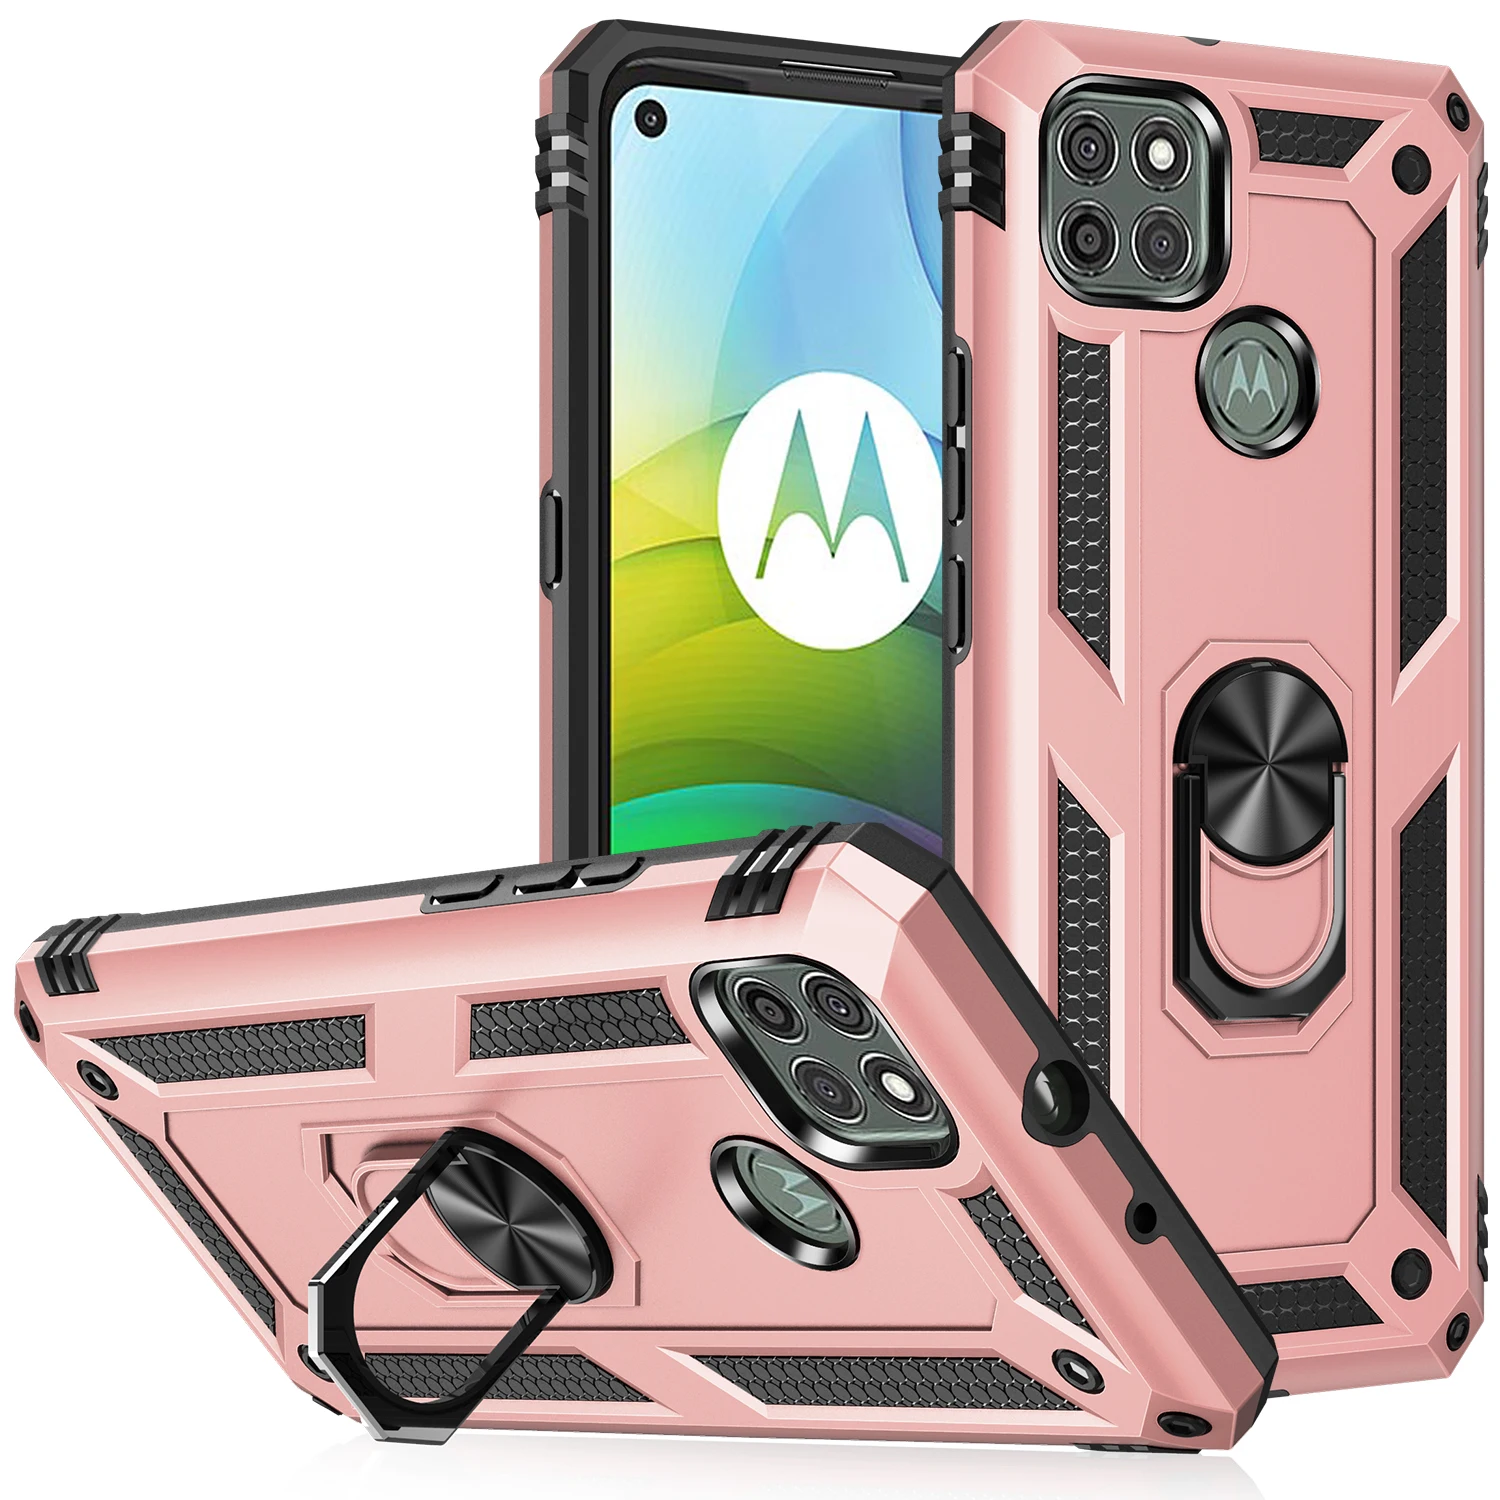 

Phone Case For Motorola G8 E7 G9 G One 5G Ace Fusion Hyper Power Lite Play Plus Stylus 2021 Edge S Armor With Ring Bracket Cover